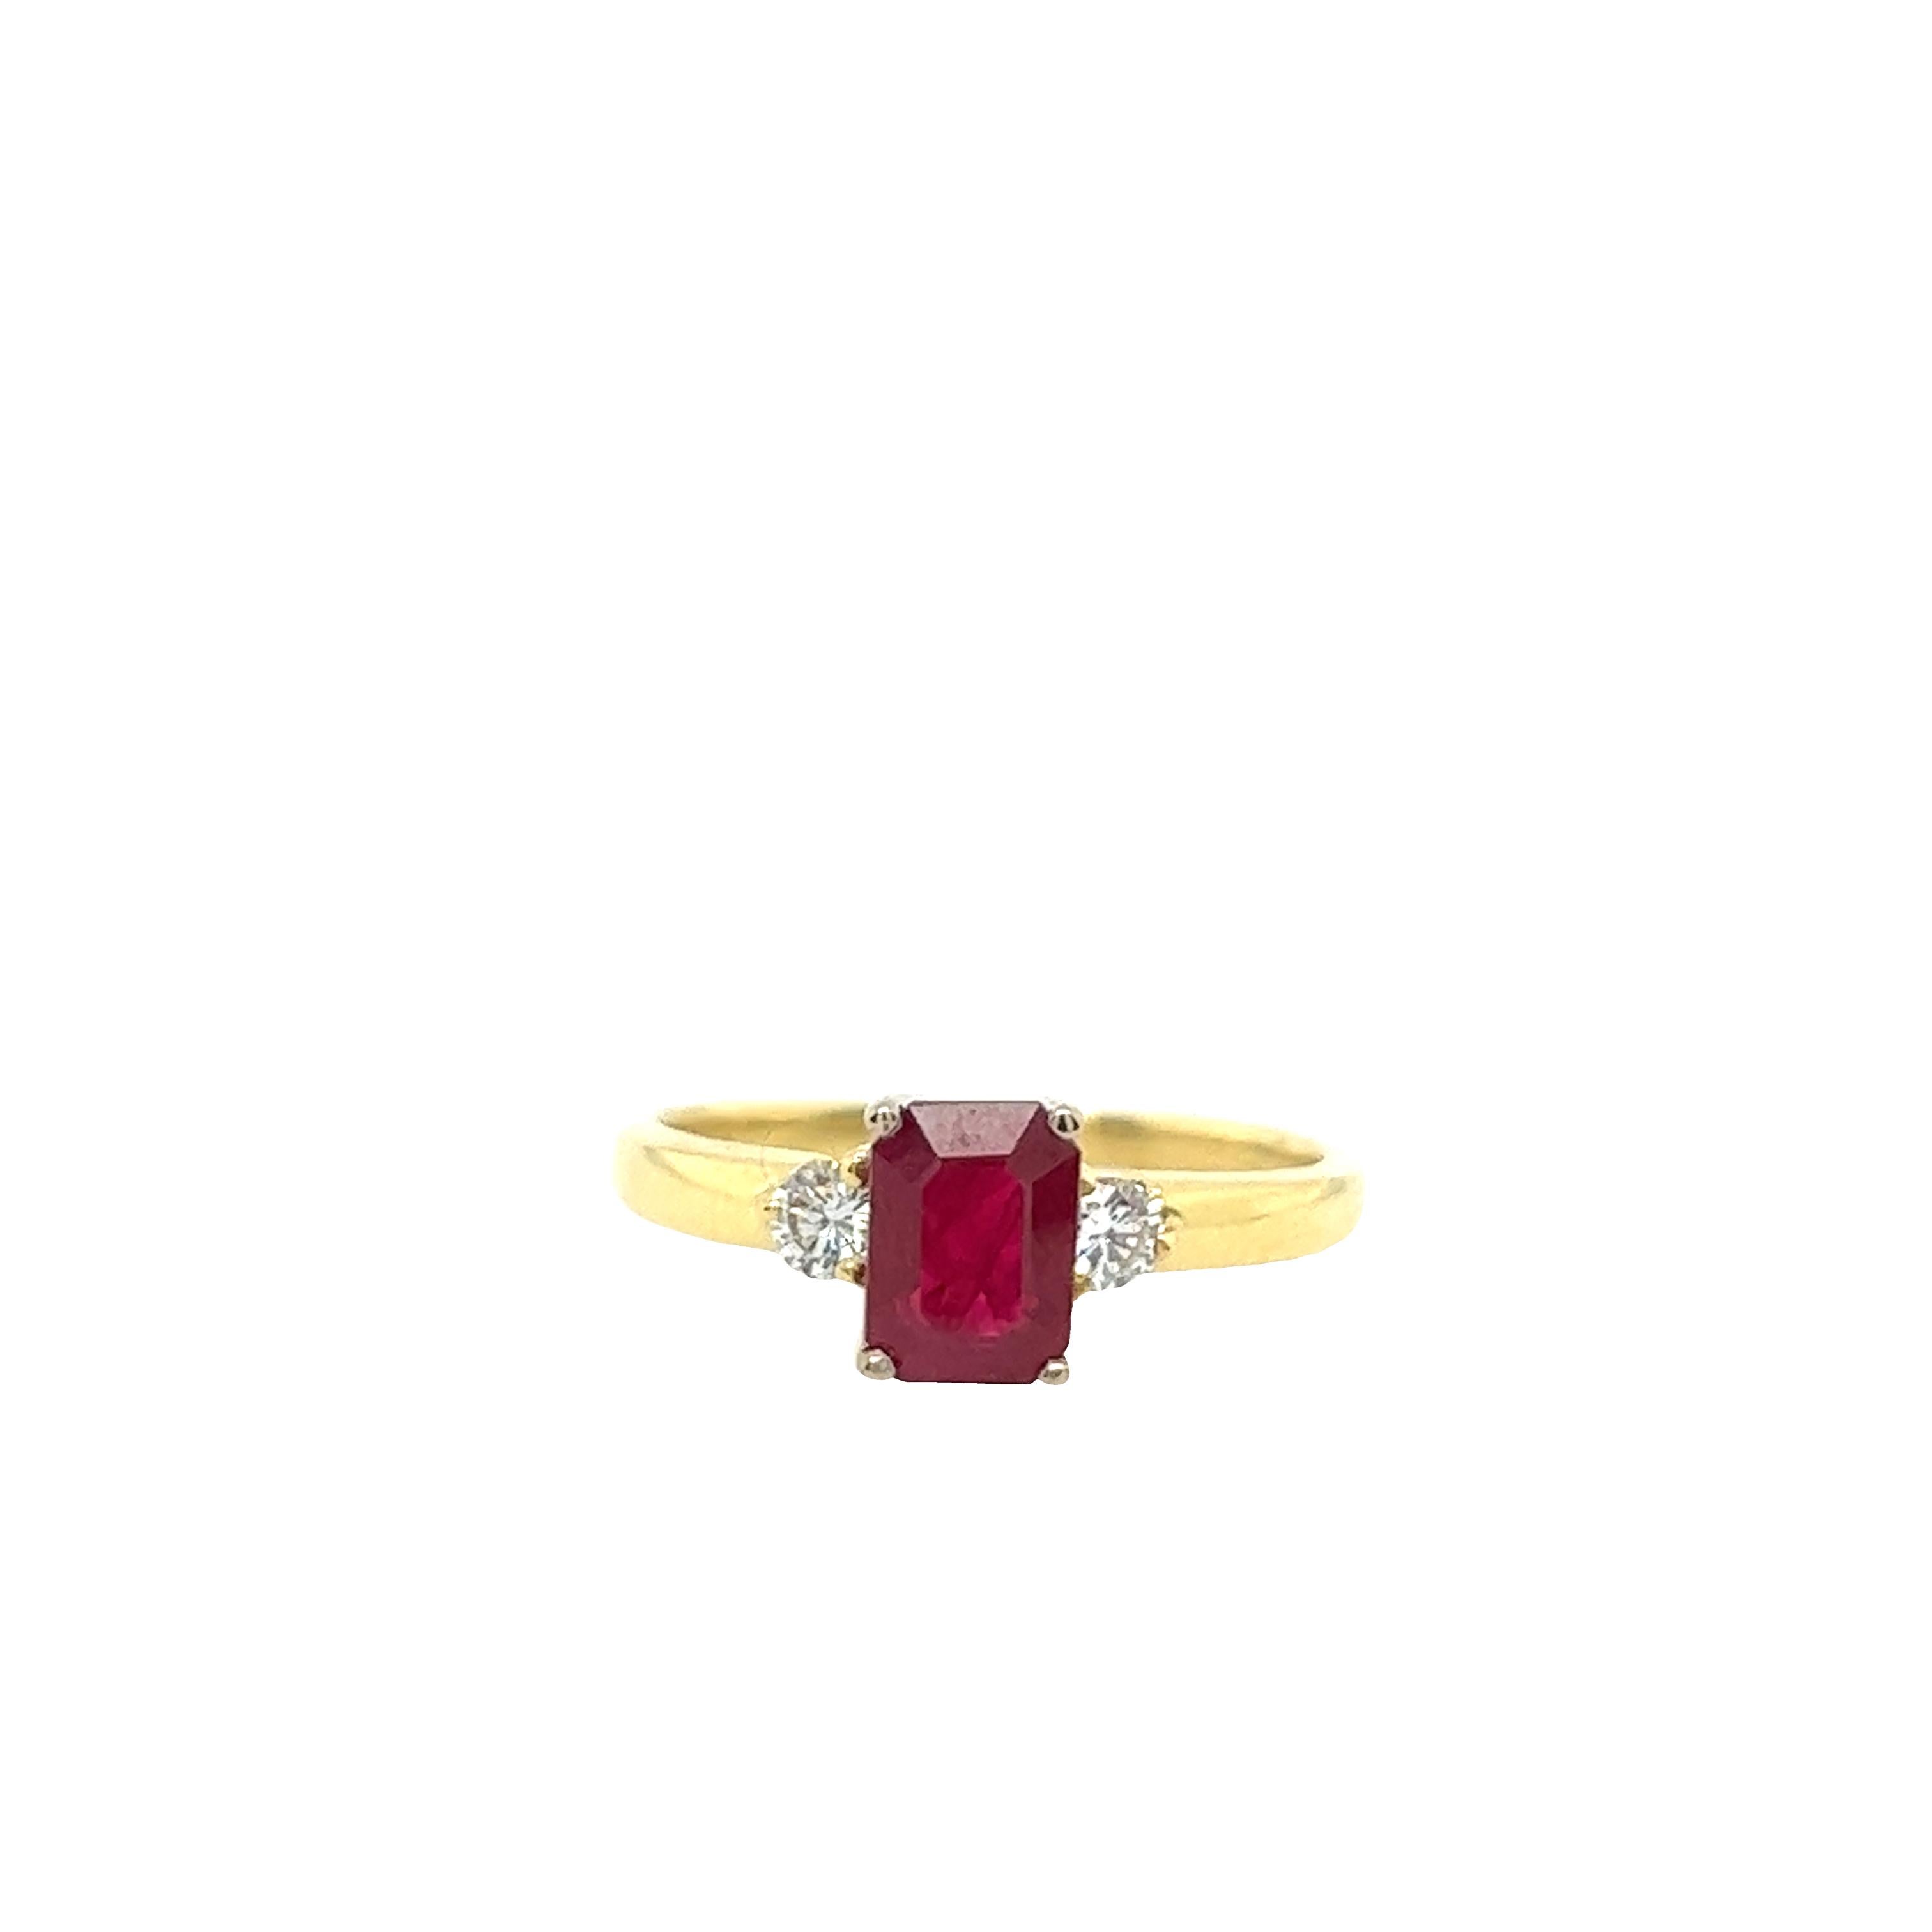 An elegant and unique vintage ruby and diamond ring, set with 2 round brilliant cut natural diamonds 0.20ct, in an 18ct yellow gold beautiful setting.

Width of Band: 1.89mm
Width of Head: 7.08mm
Length of Head: 9.33mm
Total Weight: 3.1g
Ring Size: